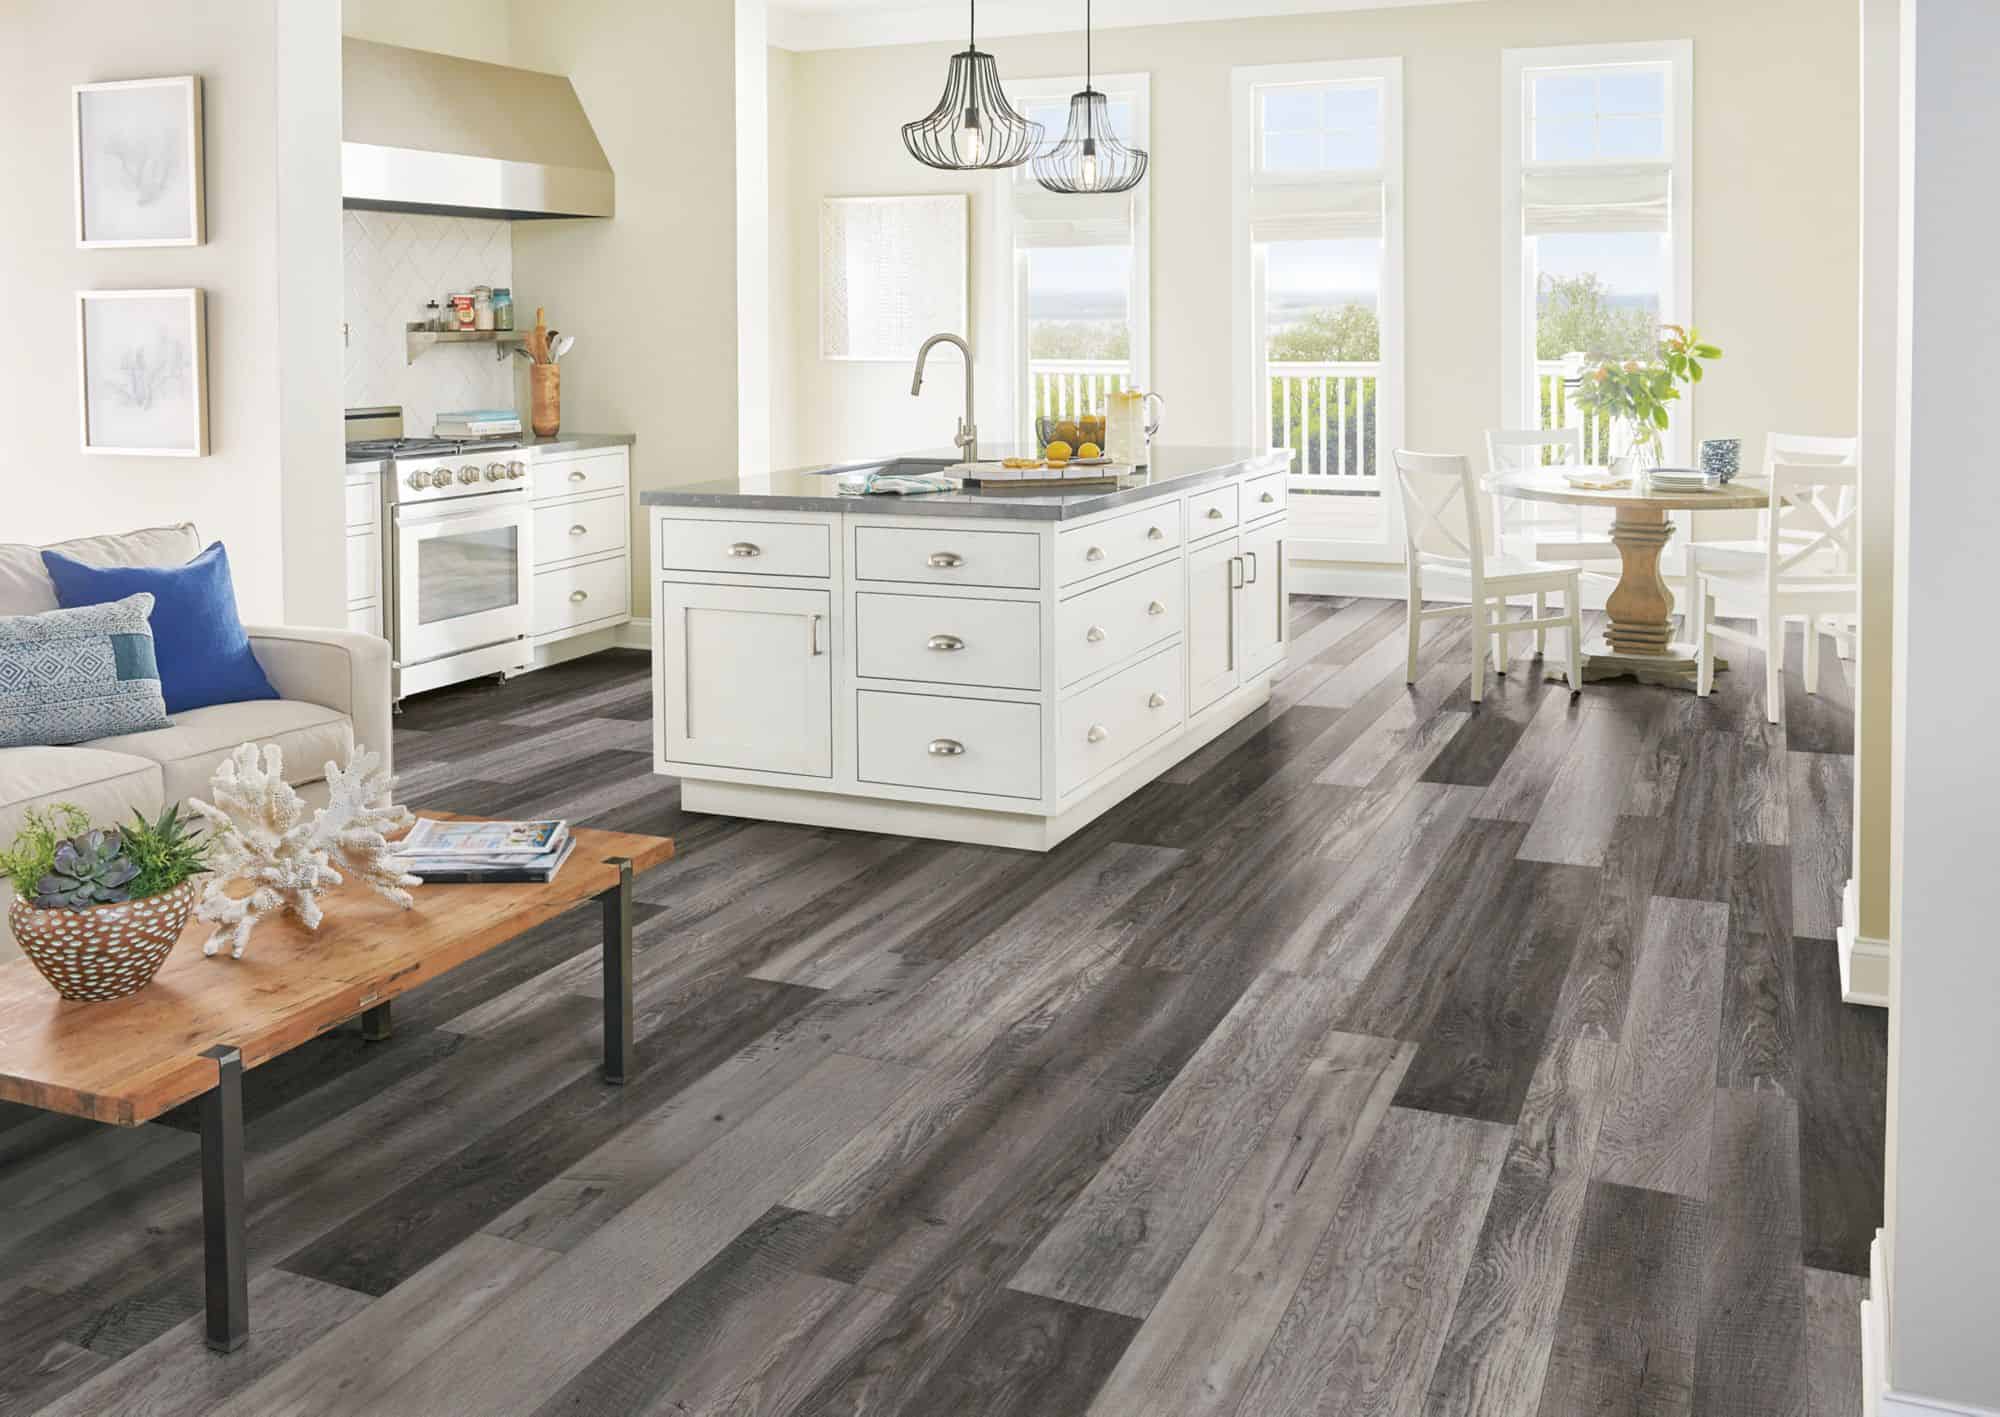 Elements of Heritage Flooring in open concept kitchen and living